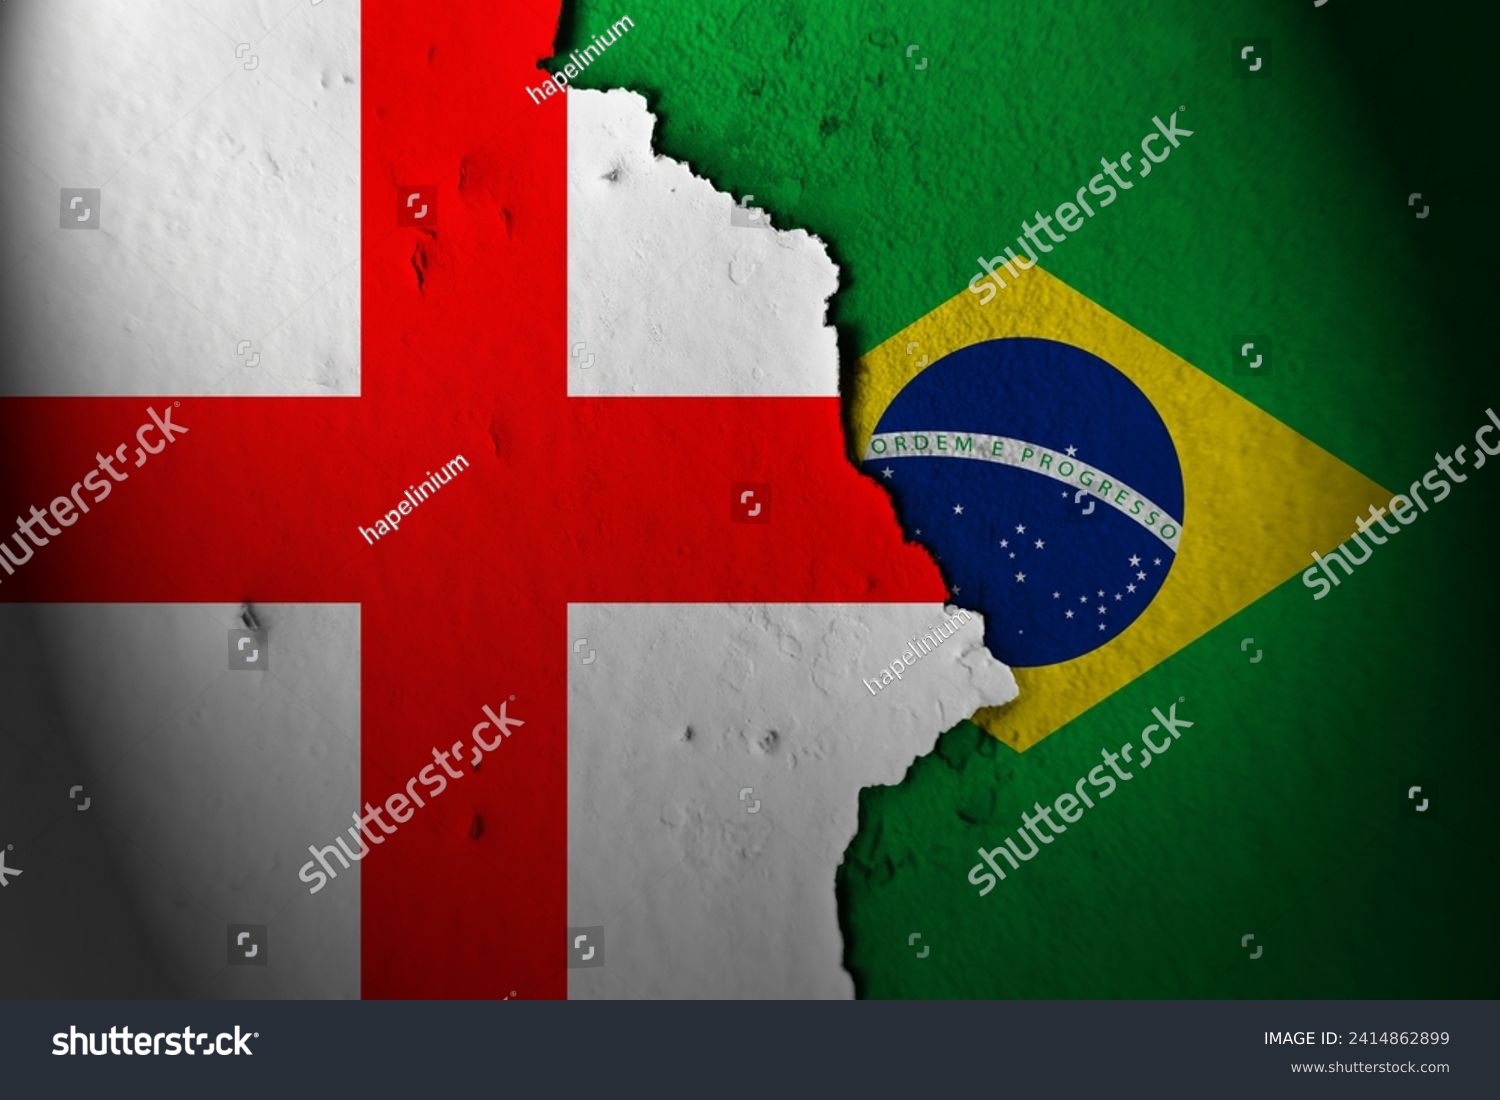 Relations between england and brazil #2414862899